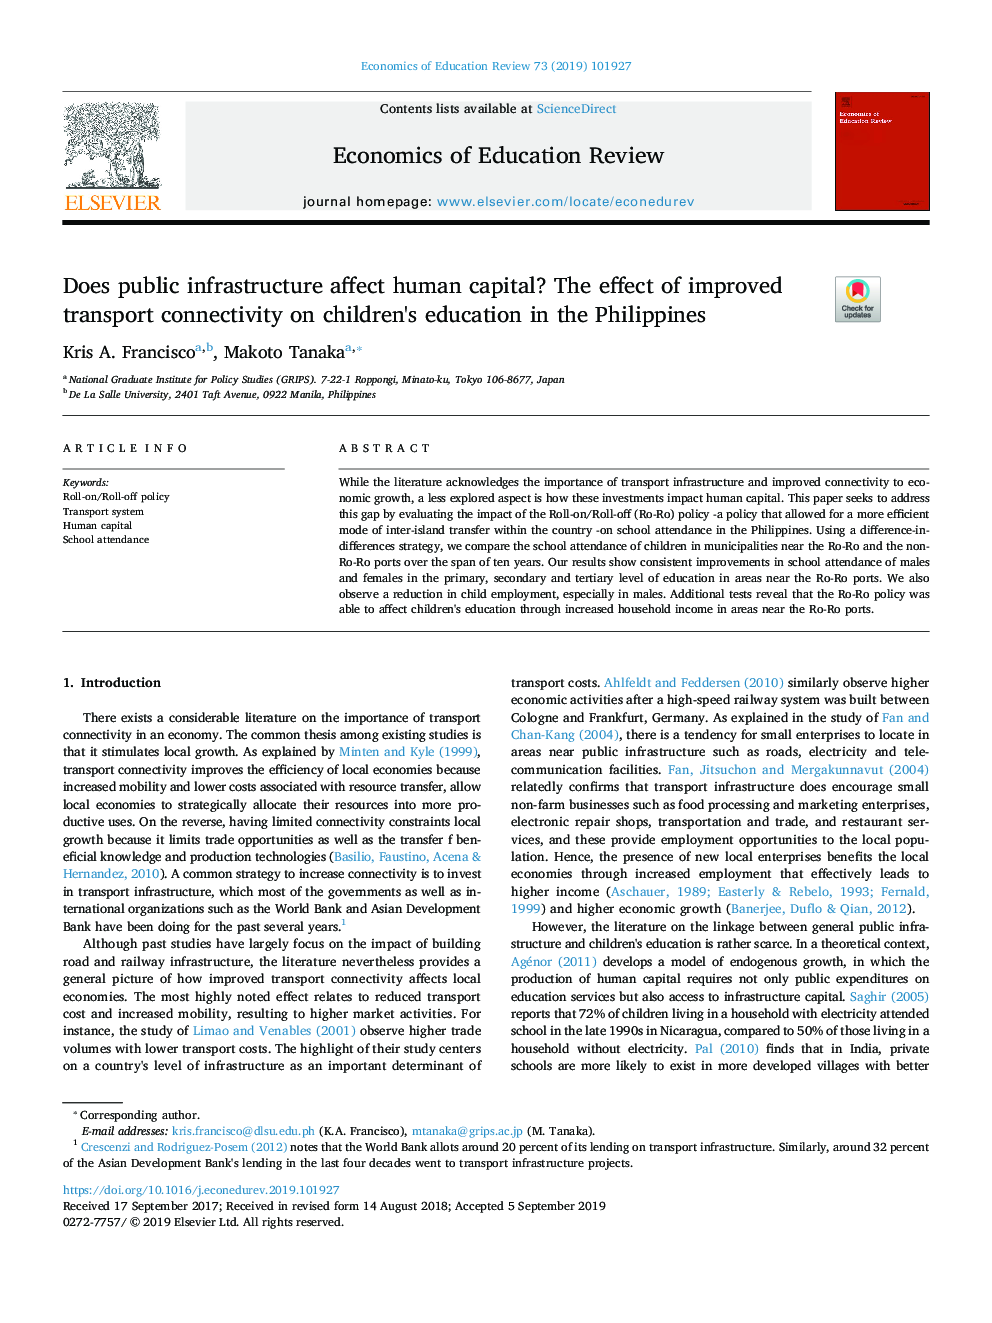 Does public infrastructure affect human capital? The effect of improved transport connectivity on children's education in the Philippines